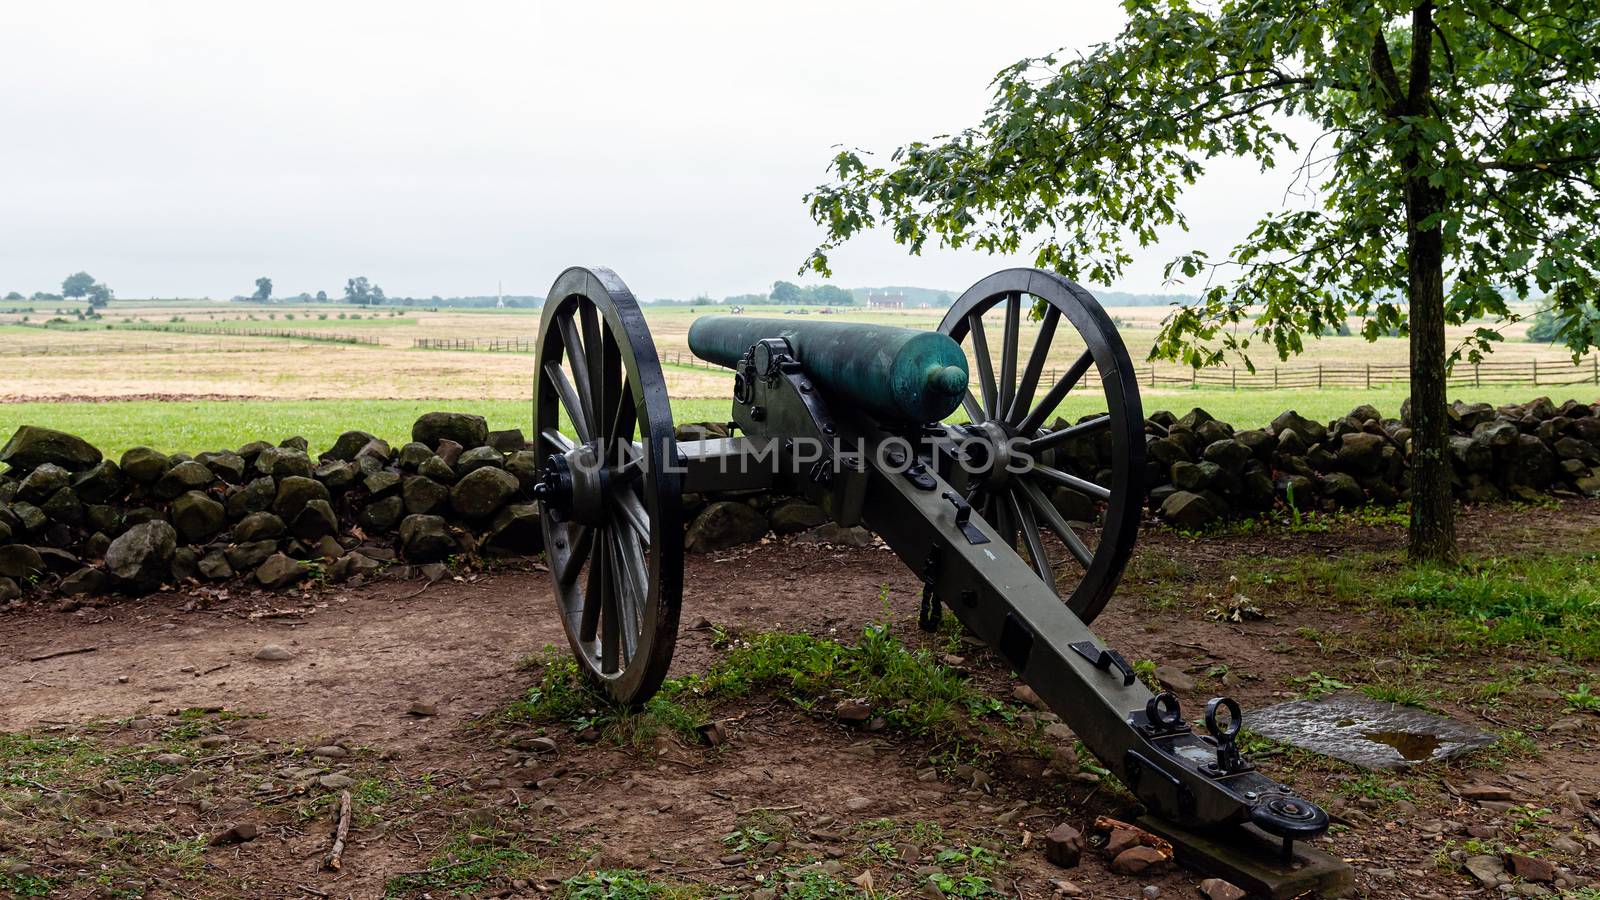 A Civil War era cannon is placed behind a stone wall in Gettysburg, PA